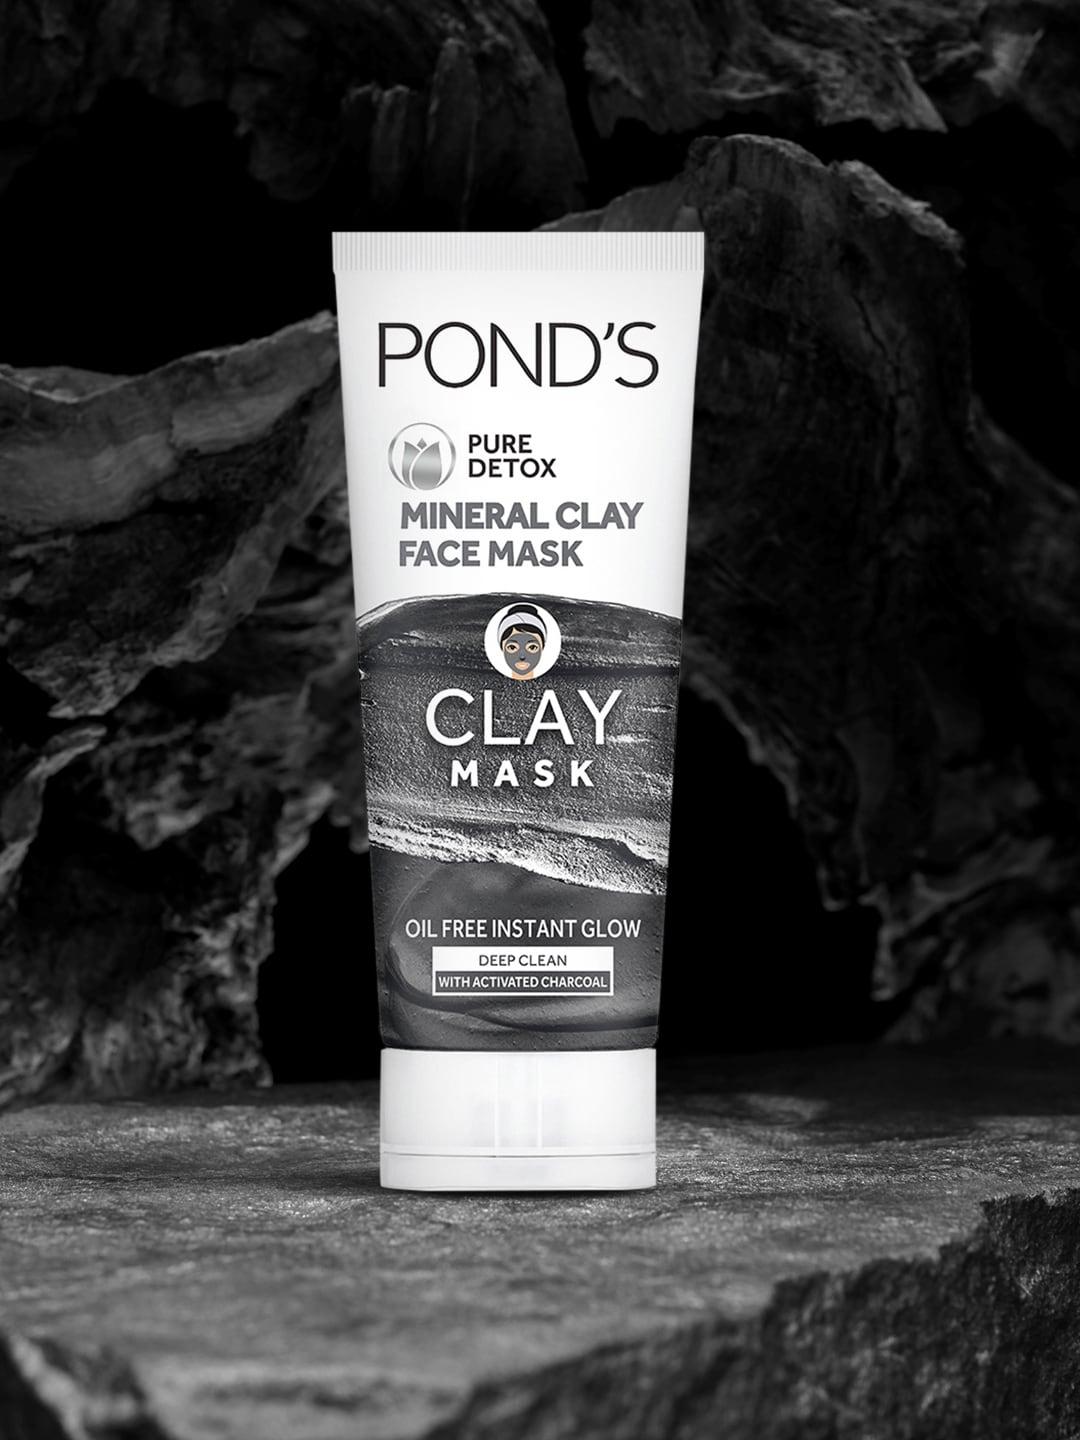 Ponds Pure Detox Mineral Clay For Oil Free Instant Glow Face Mask